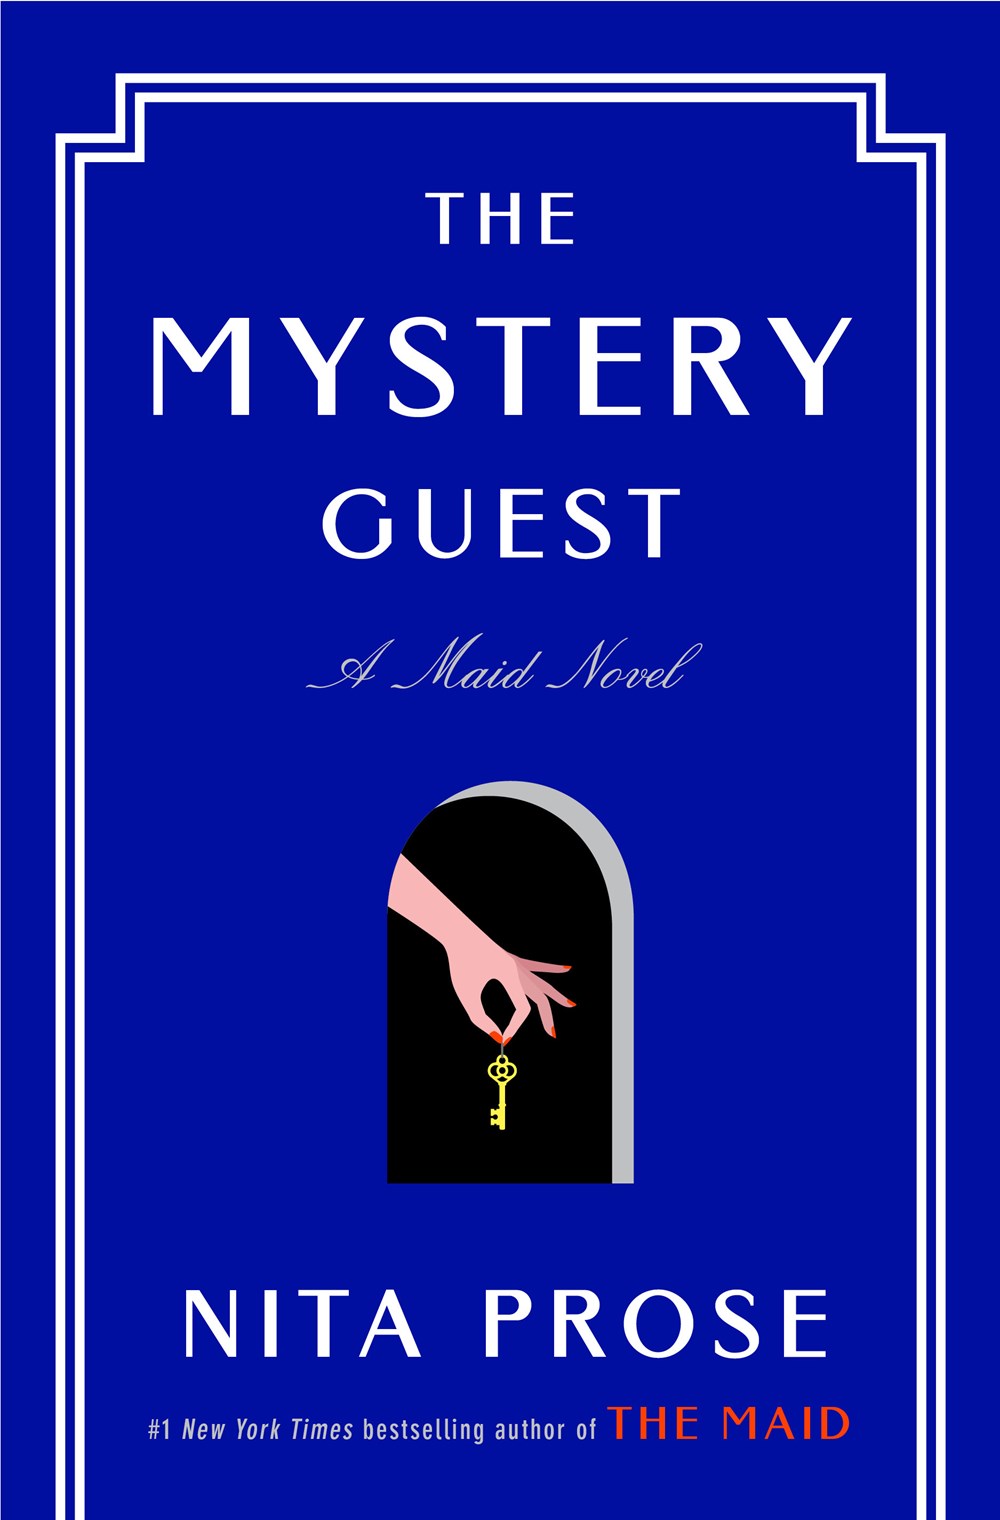 Read-Alikes for ‘The Mystery Guest’ by Nita Prose | LibraryReads